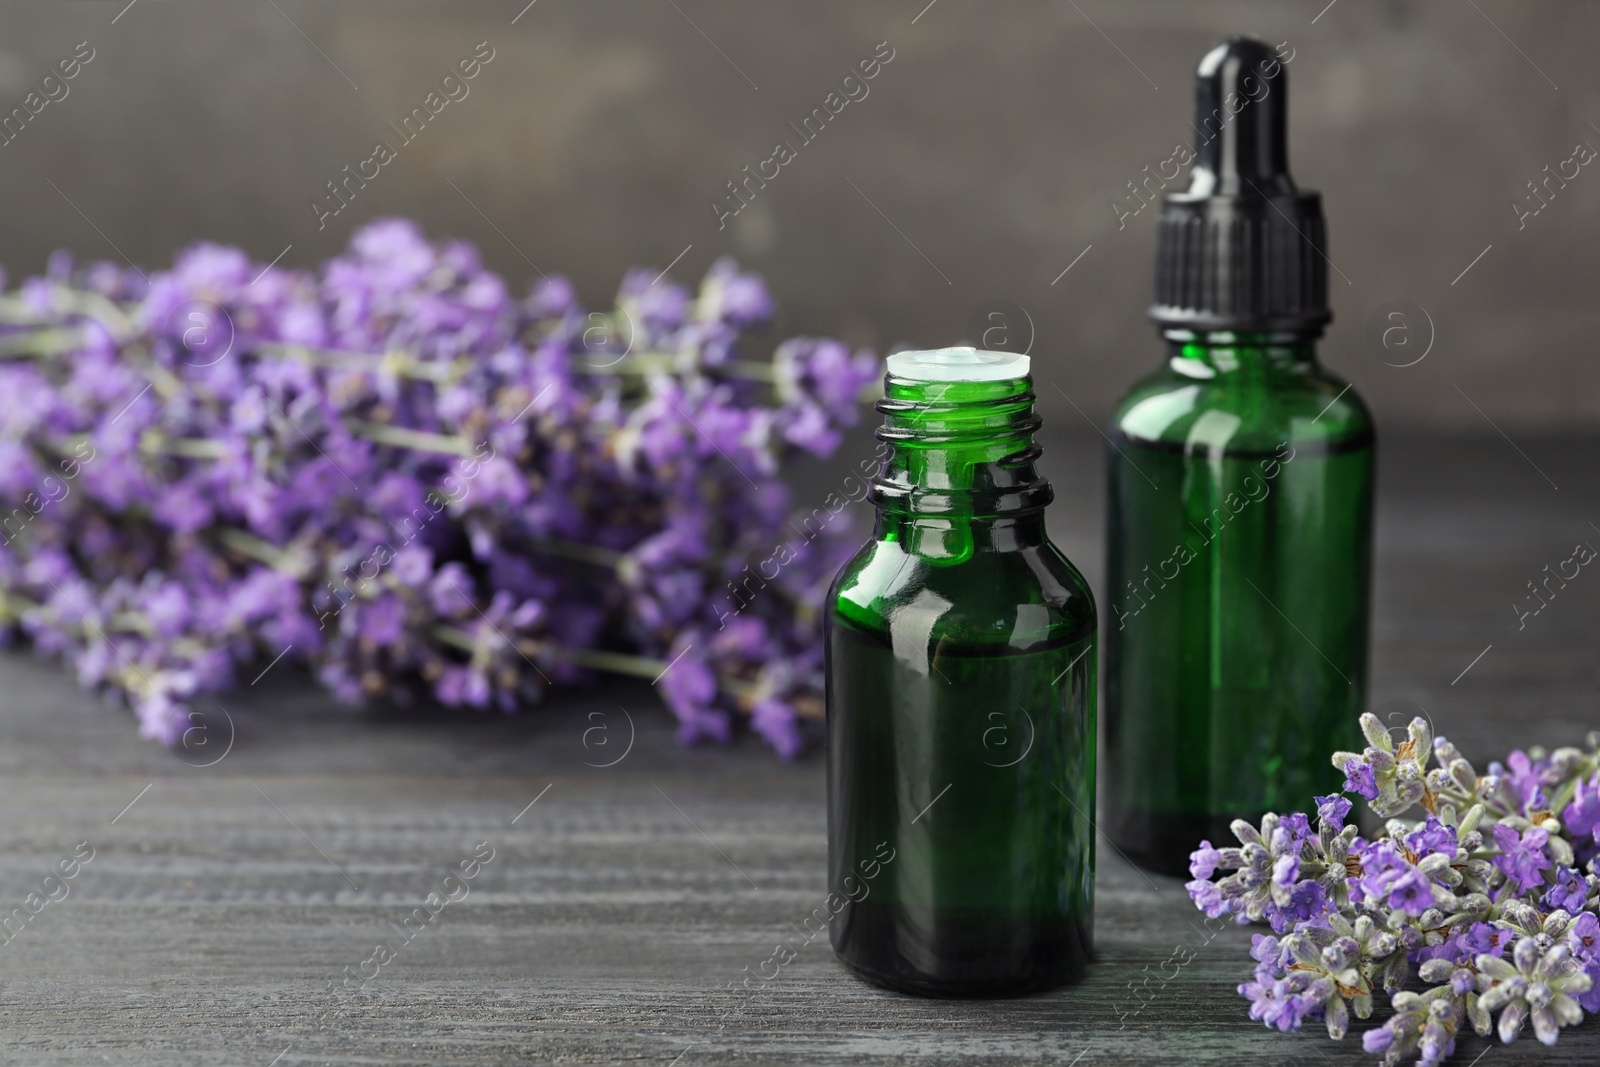 Photo of Bottles with natural lavender oil and flowers on wooden table against grey background, closeup view. Space for text